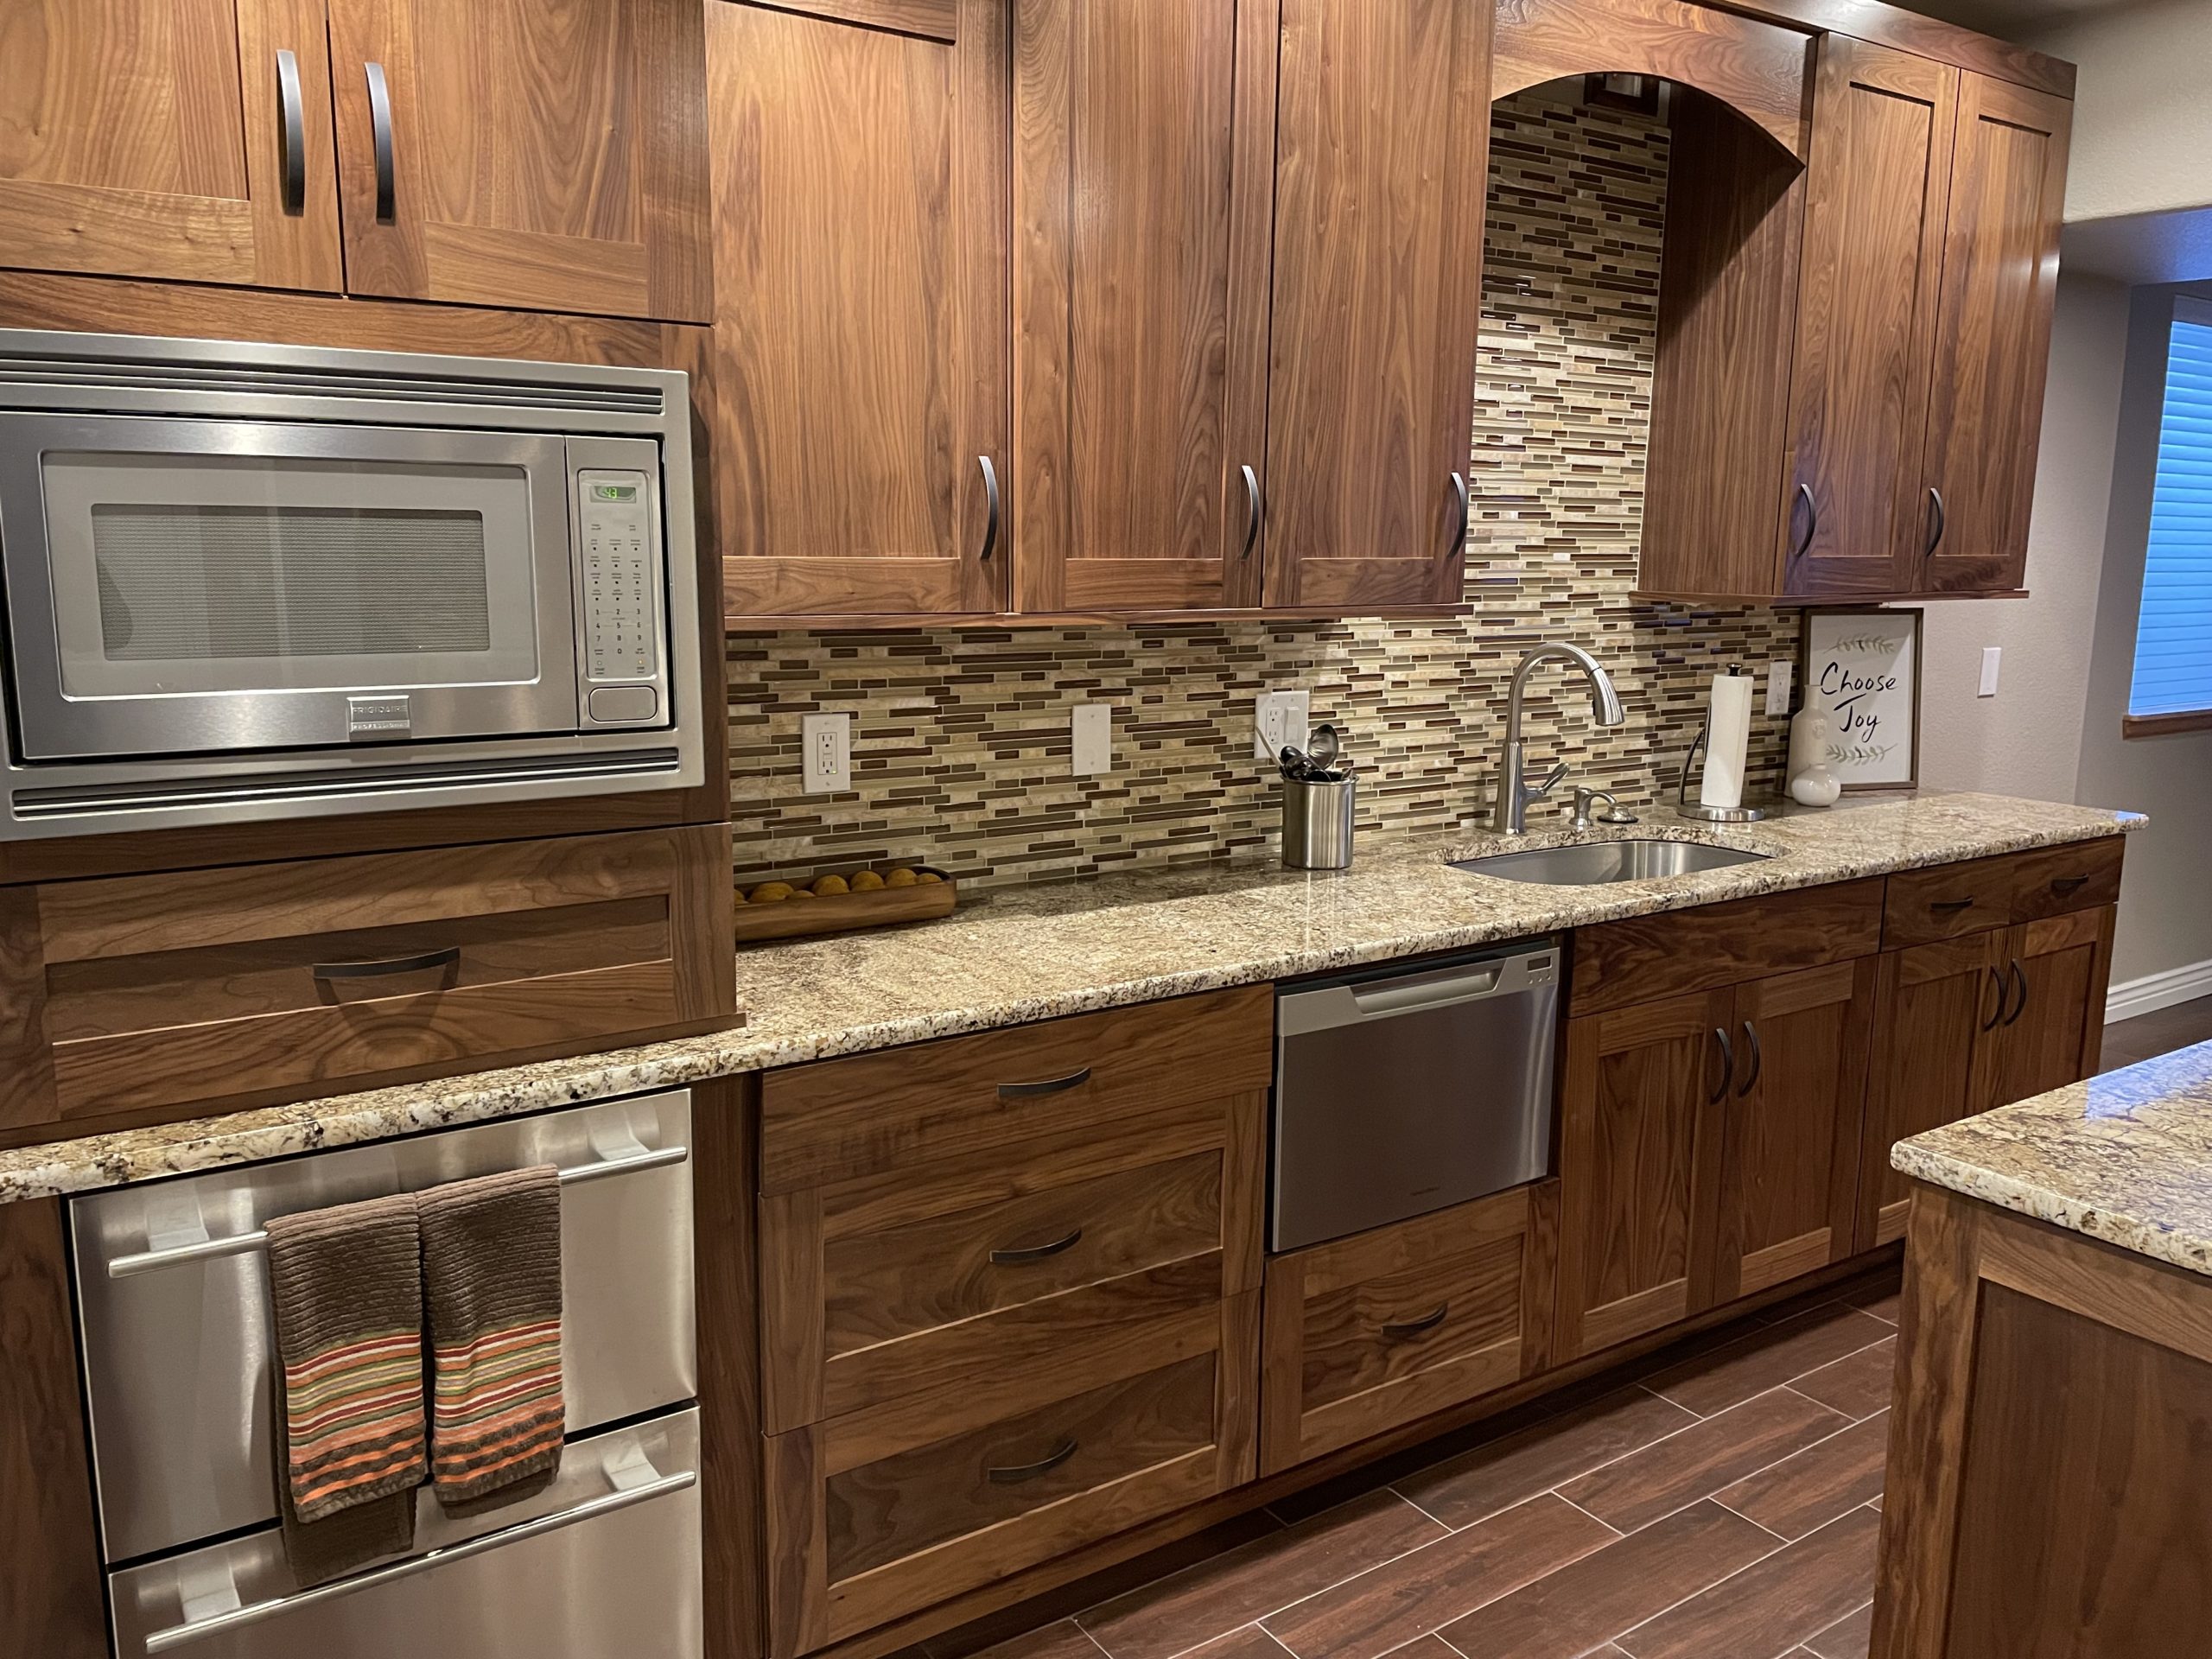 Updated wooden cabinetry and kitchen in Boulder